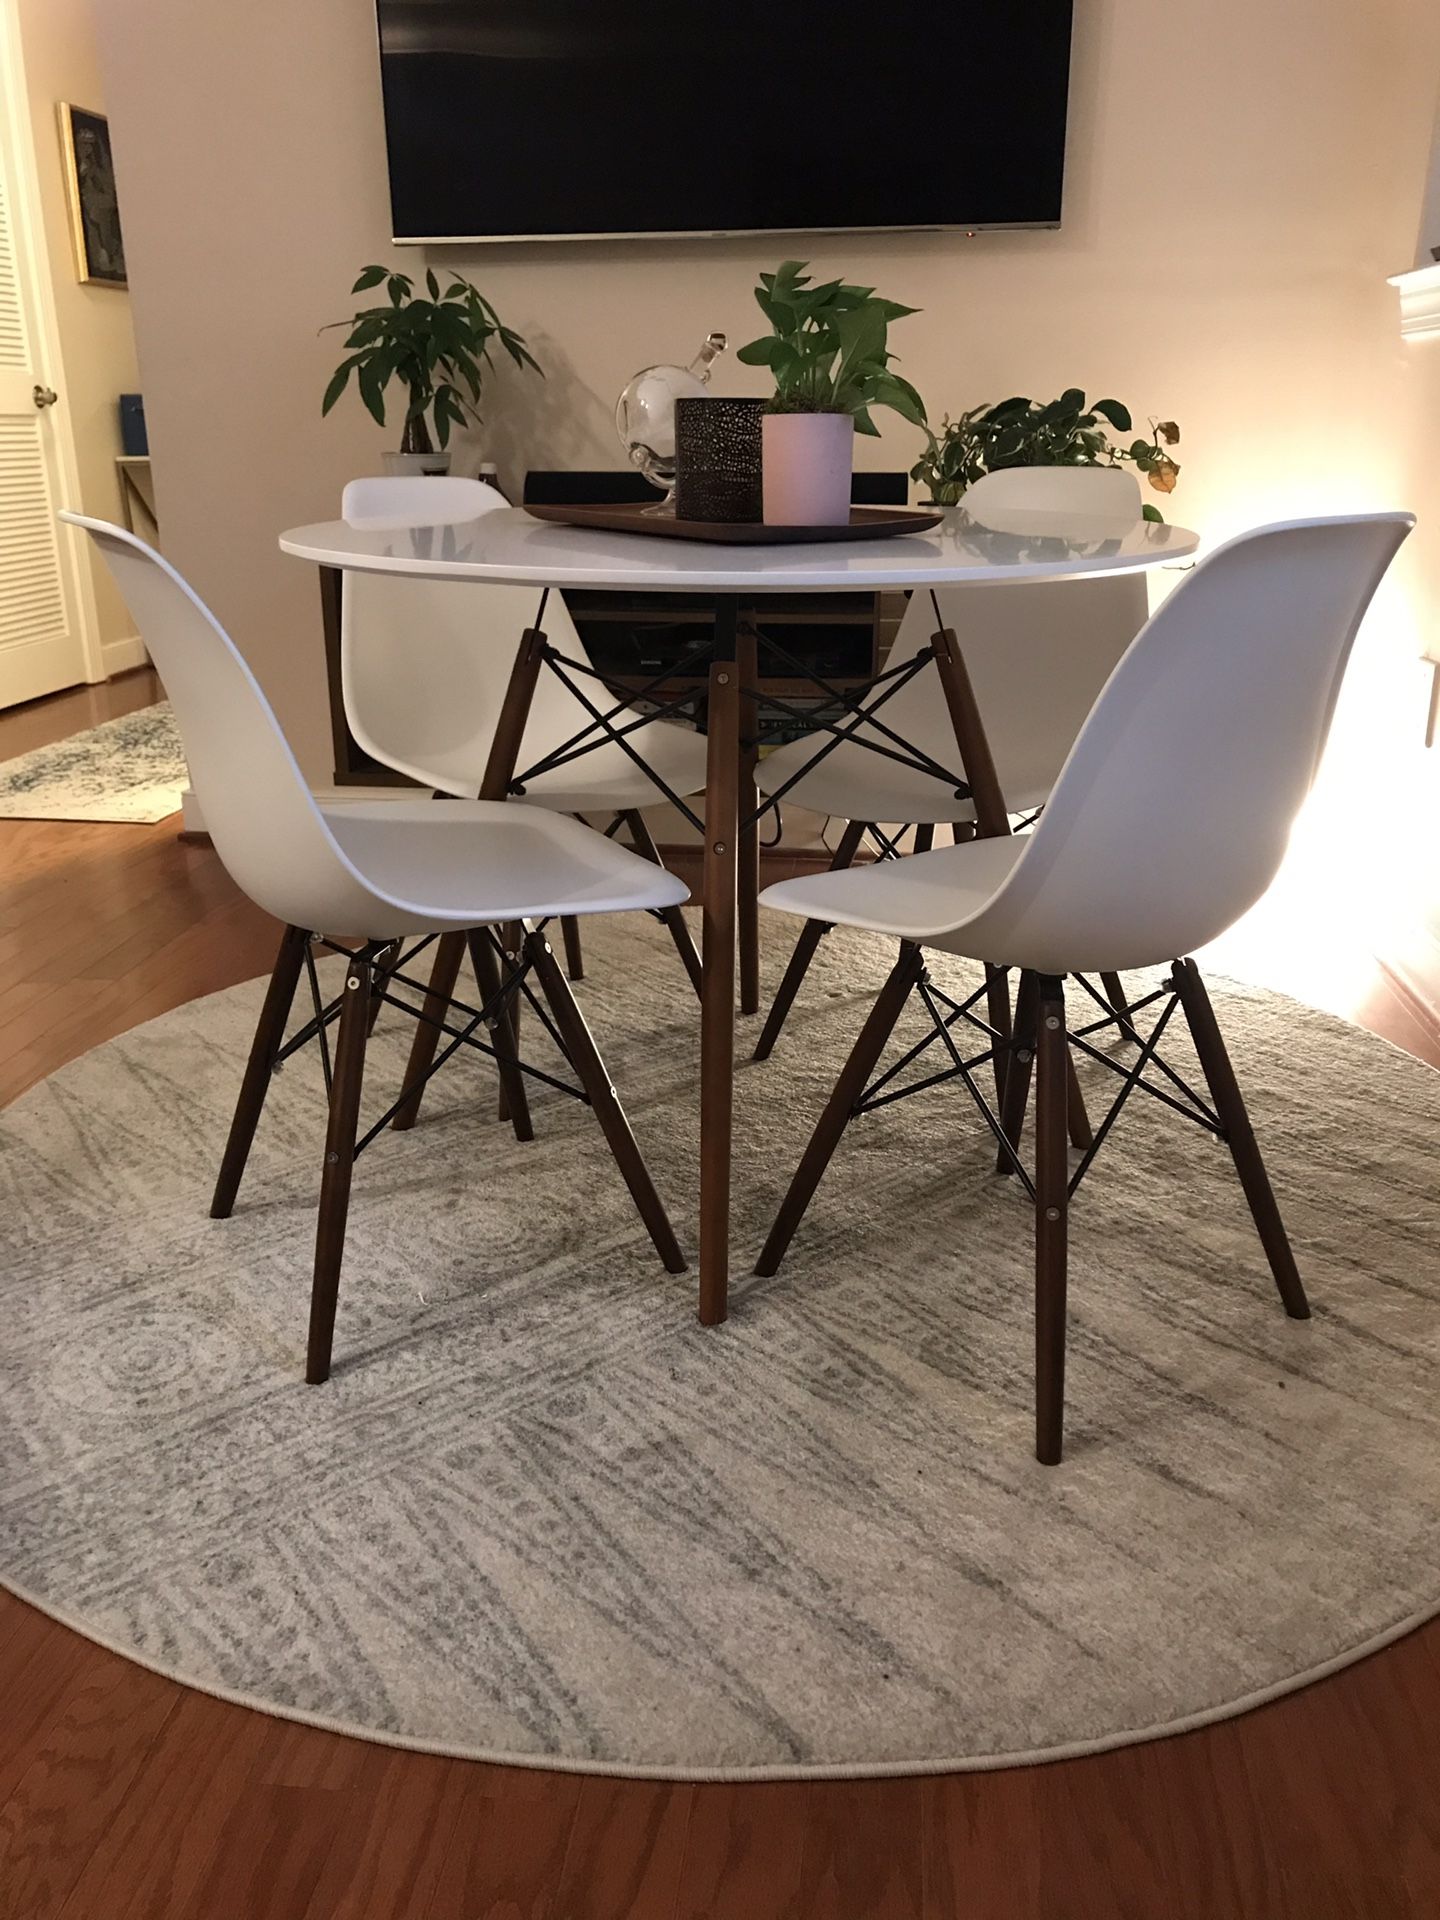 Mid century modern table & chairs